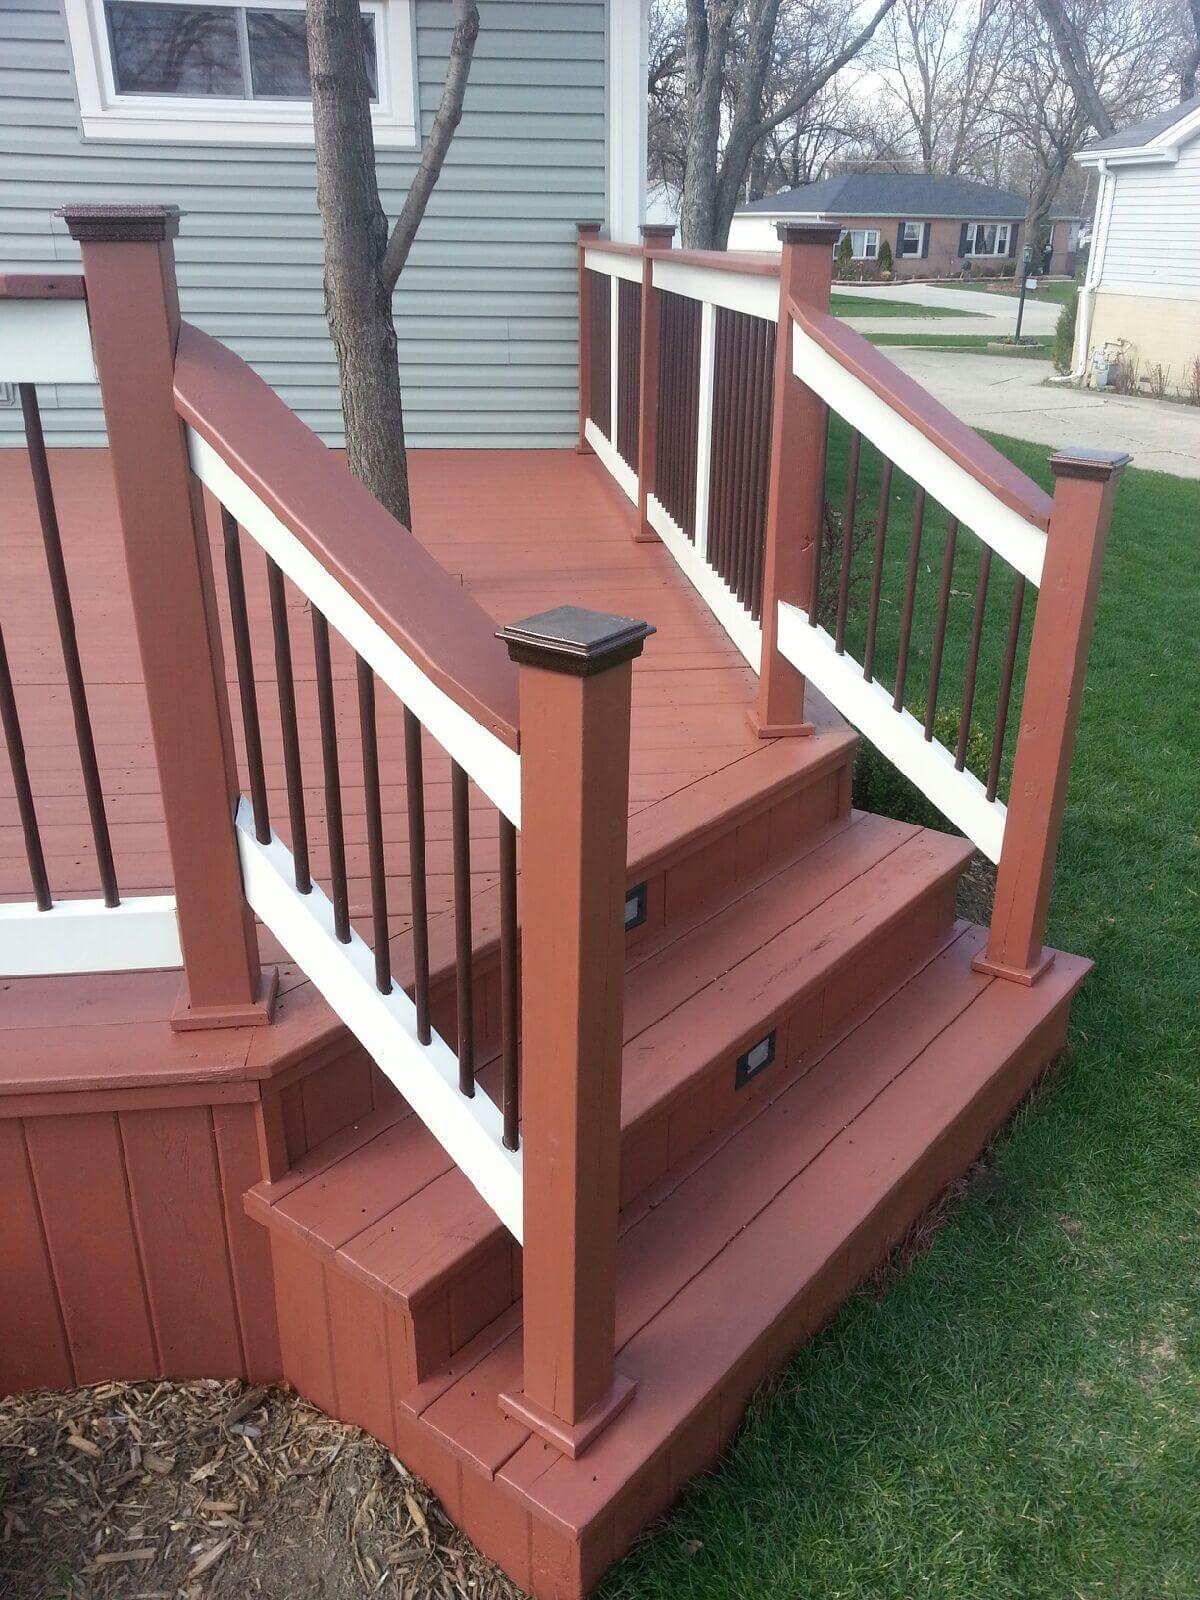 Repairs and maintenance for your deck, fence, and exterior wood staining. - Deck Staining Wheeling - Deck Cleaning Services